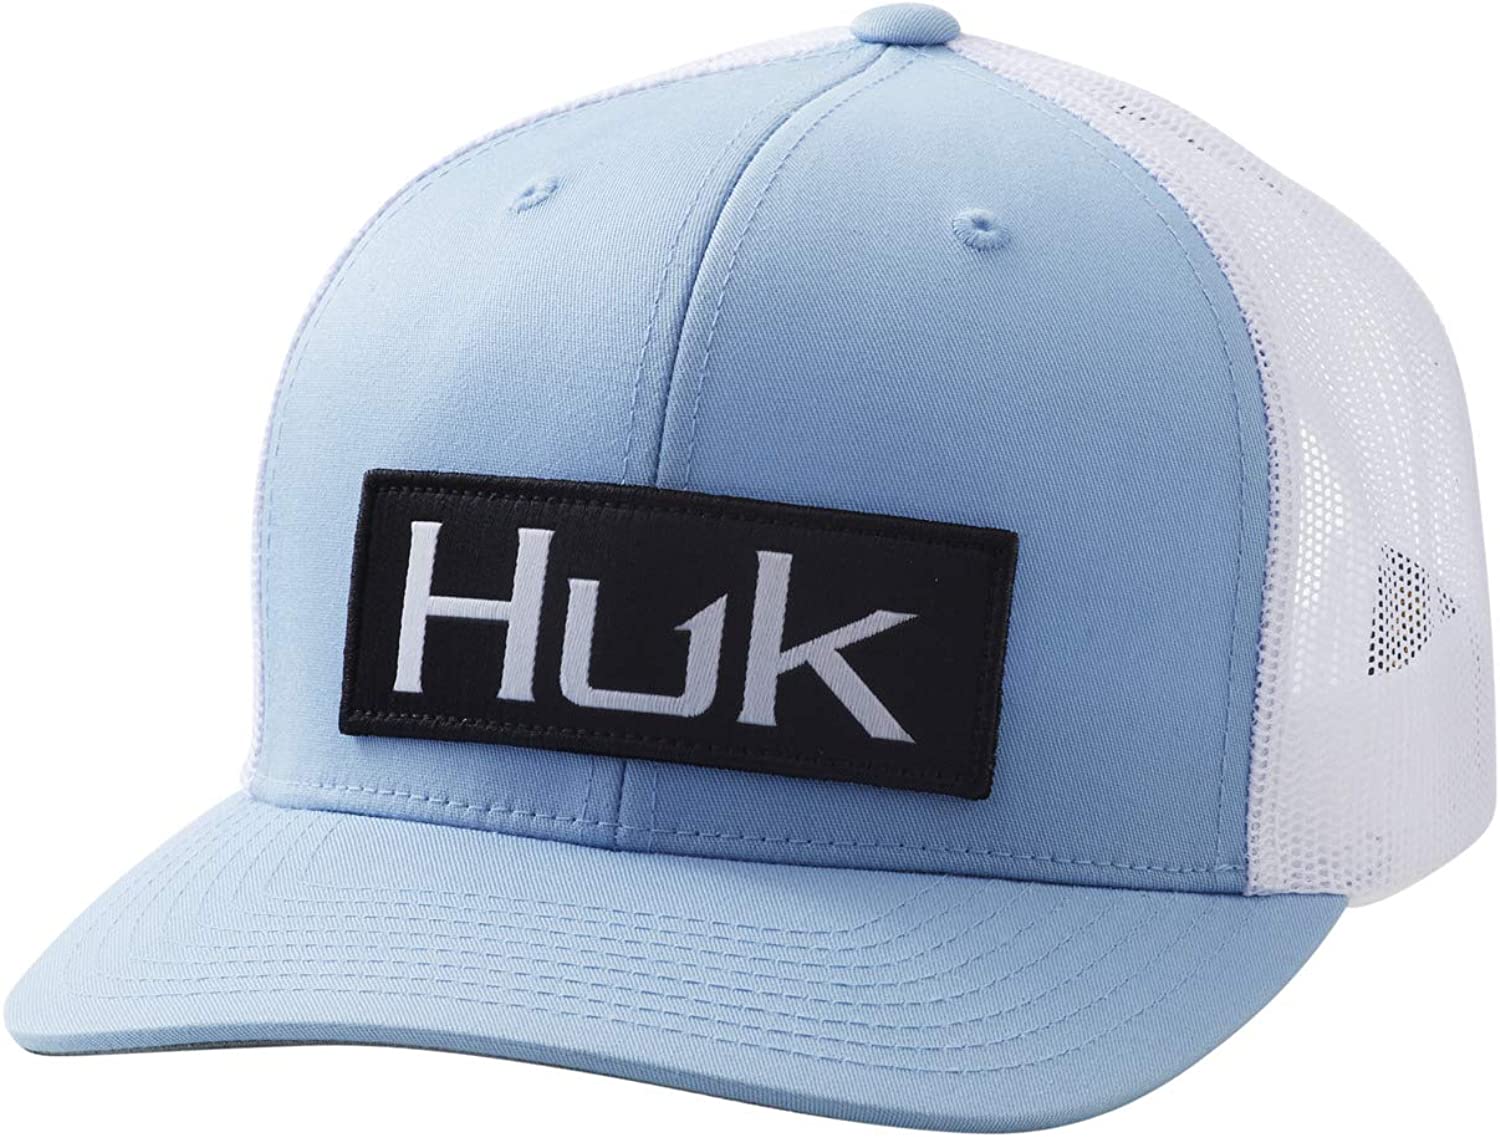 HUK Huk'd Up Angler Unisex Hat One-size-fits-all - Bowtreader